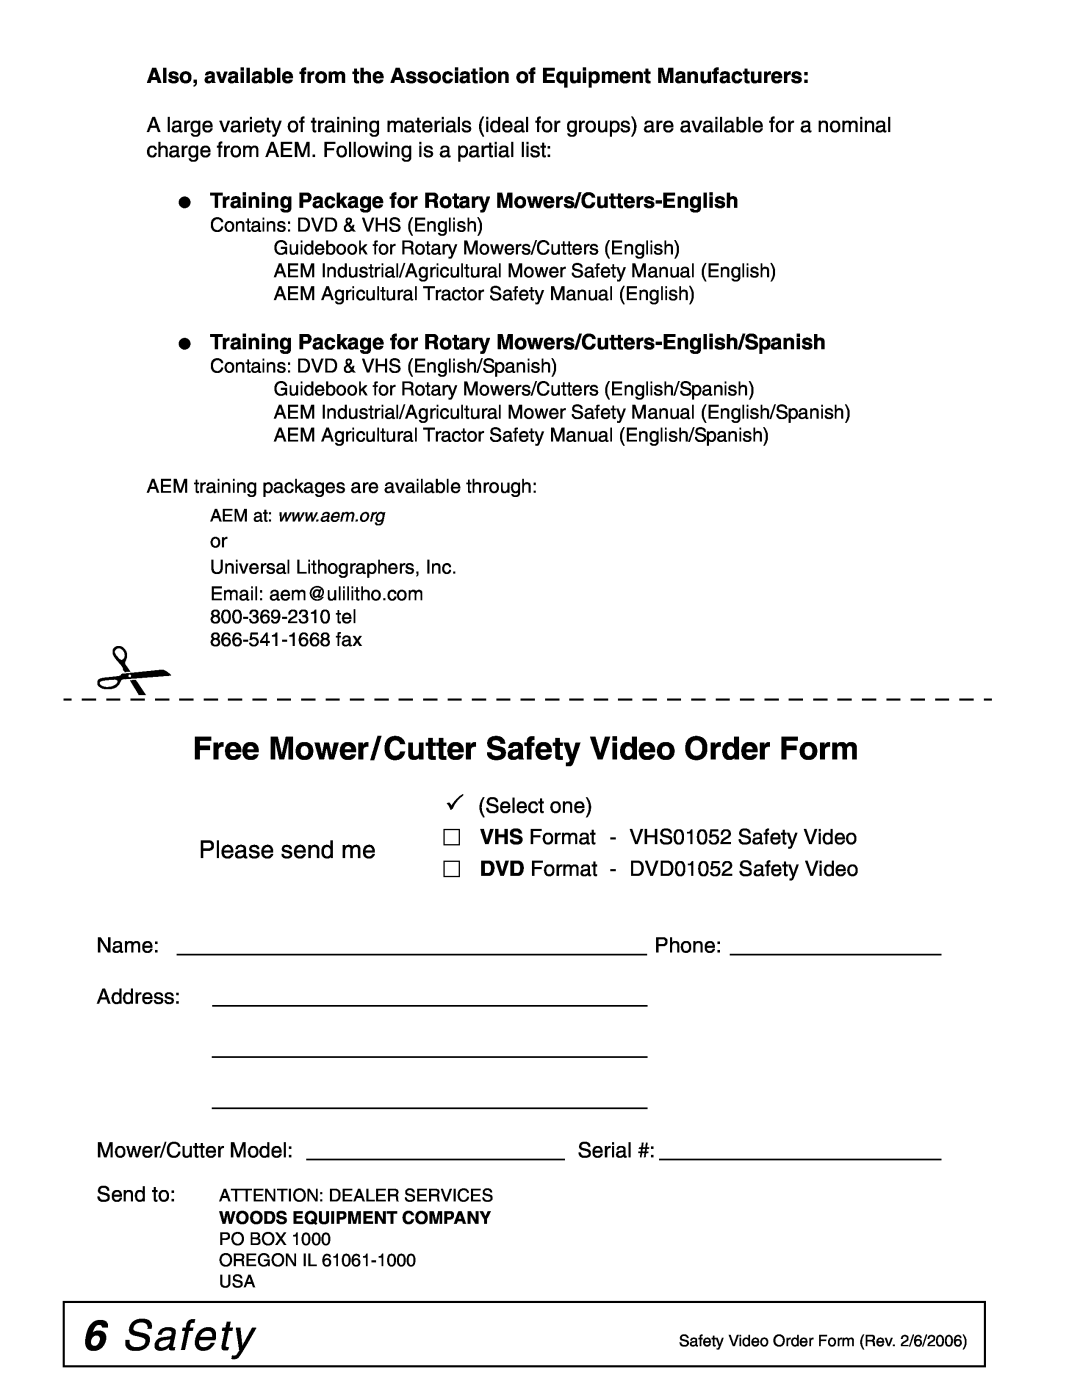 Woods Equipment BW15LH manual 6Safety, Free Mower/Cutter Safety Video Order Form, Please send me 